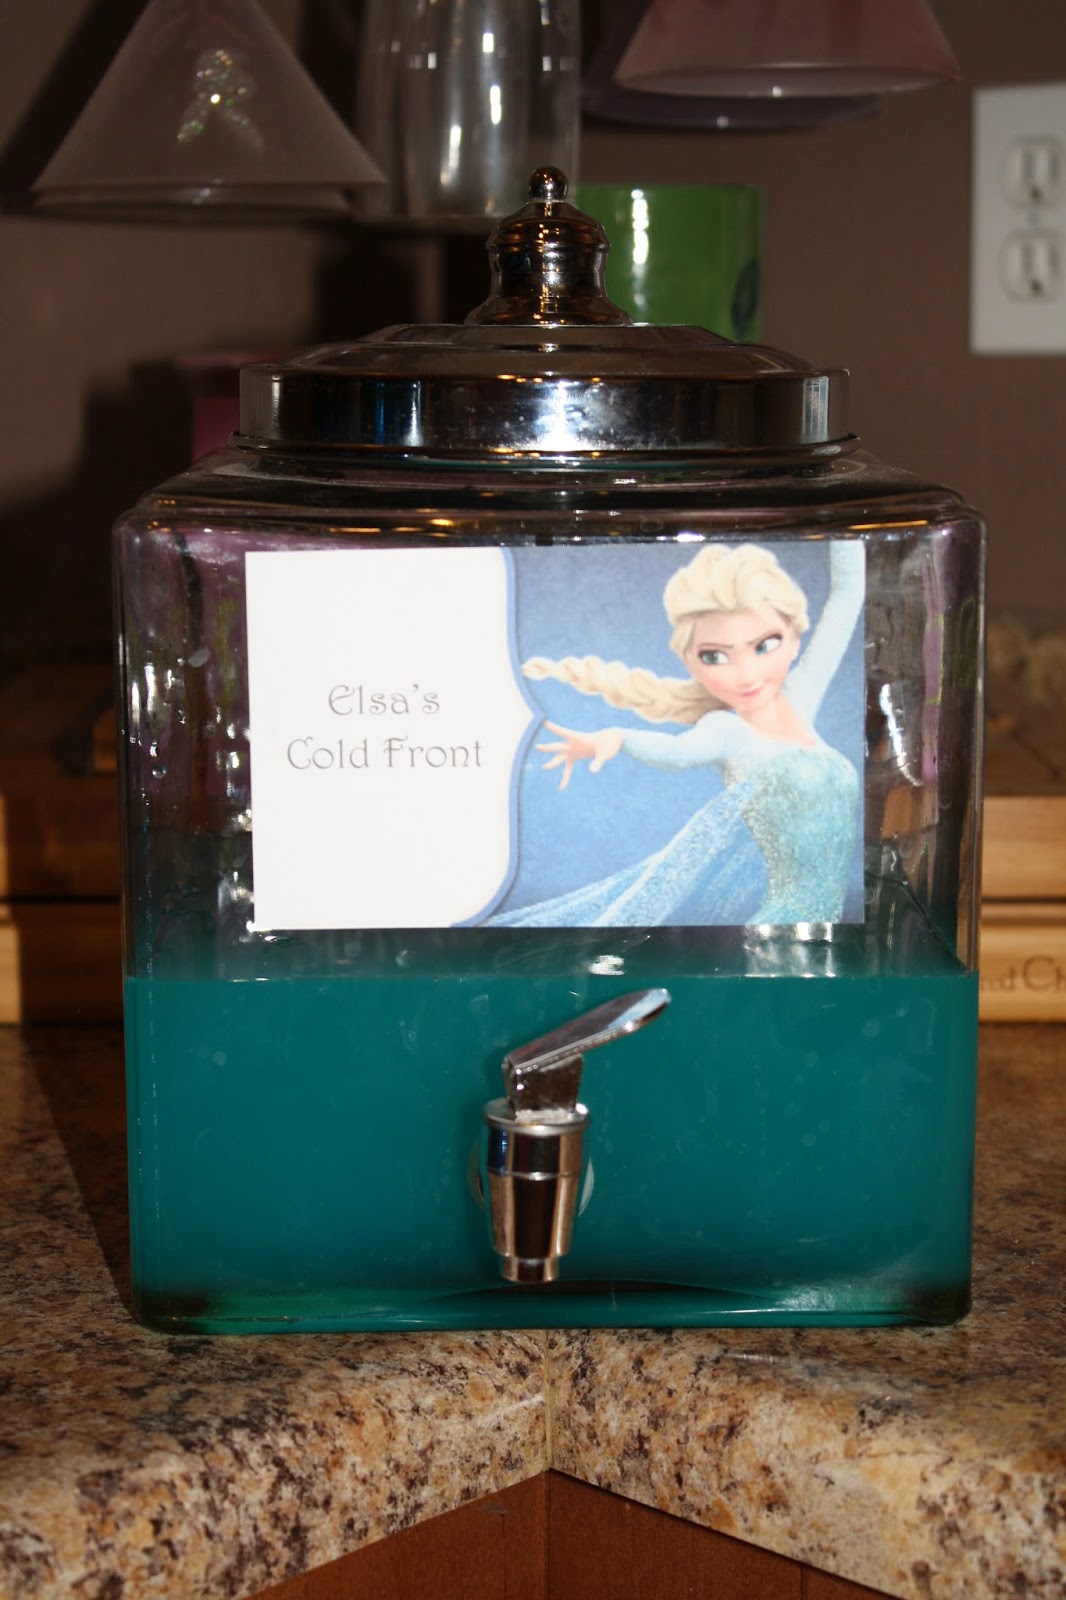 From Heels To Home Cooked Meals: Frozen Themed Blue Margarita